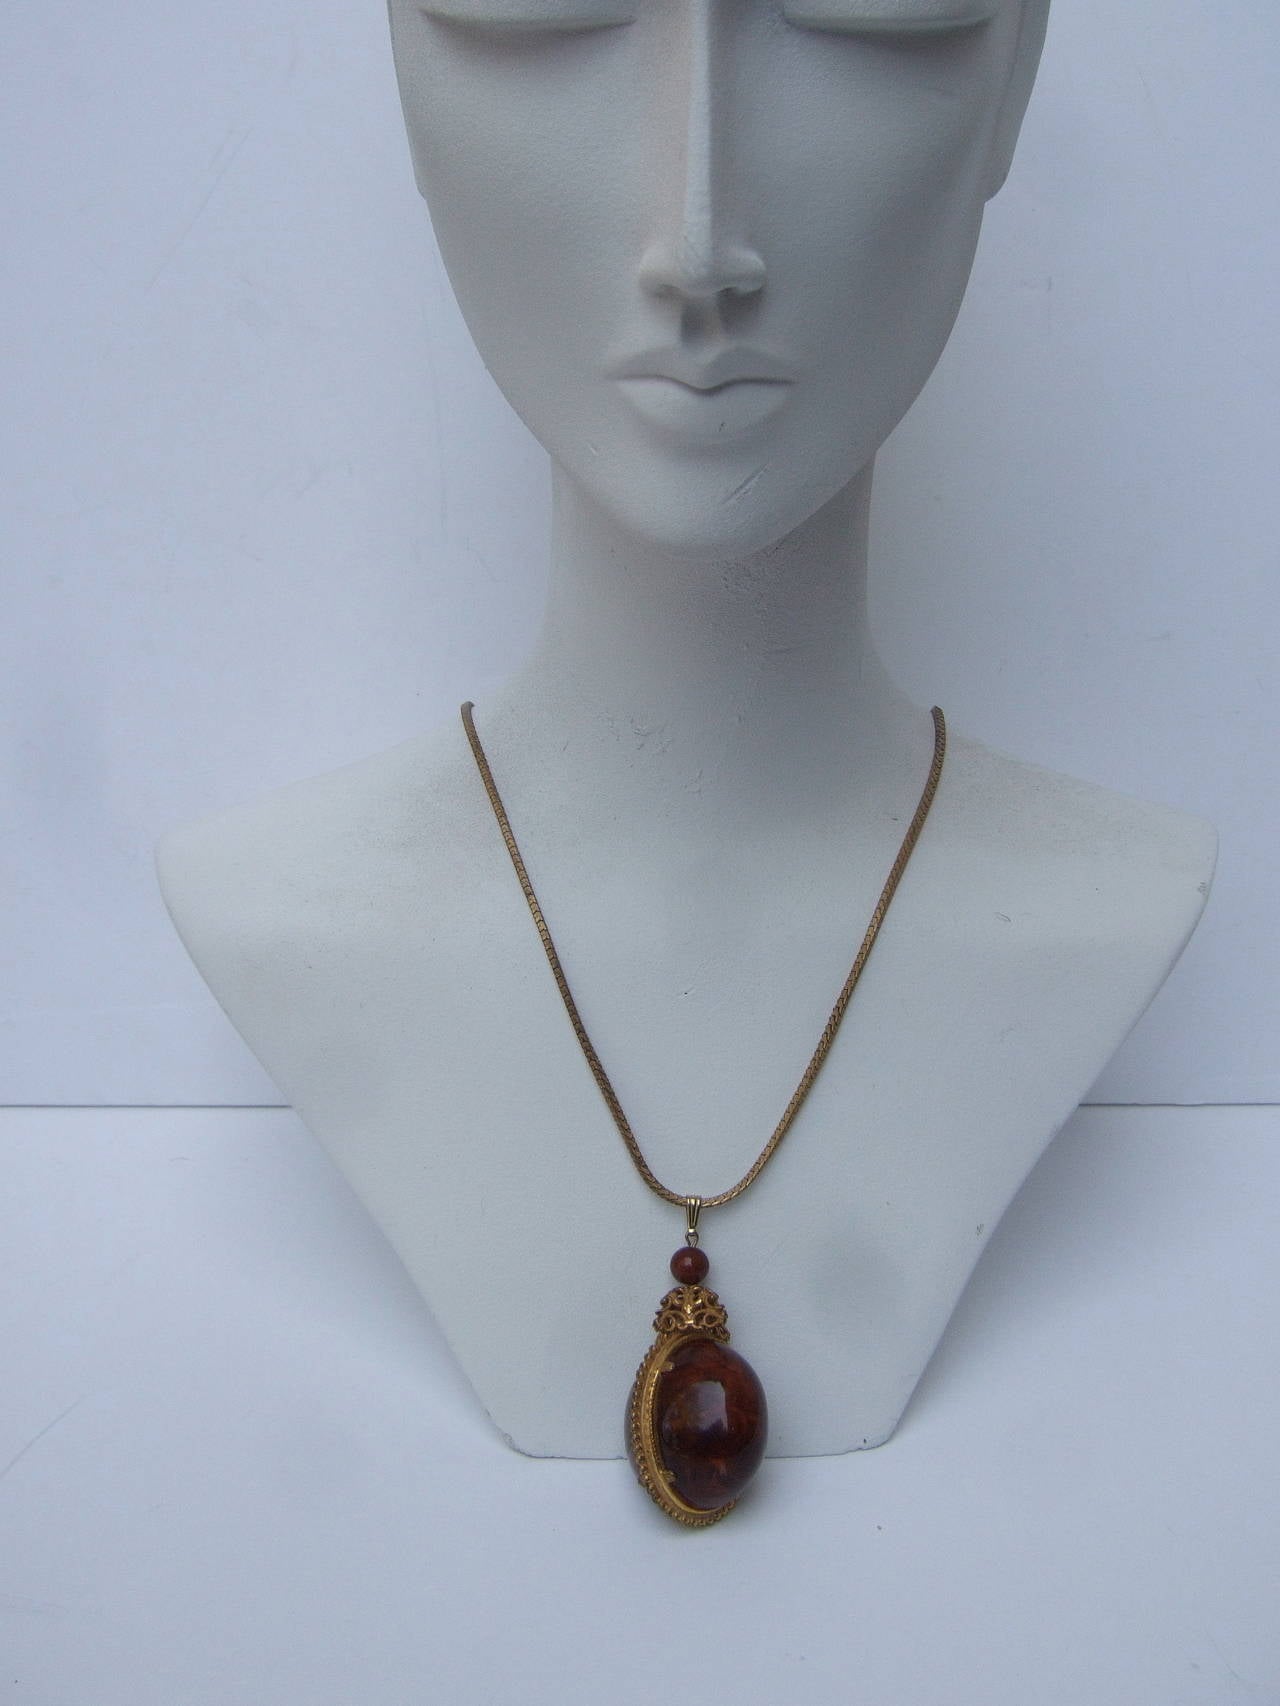 Women's Miriam Haskell Brown Lucite Egg Pendant Necklace c 1970